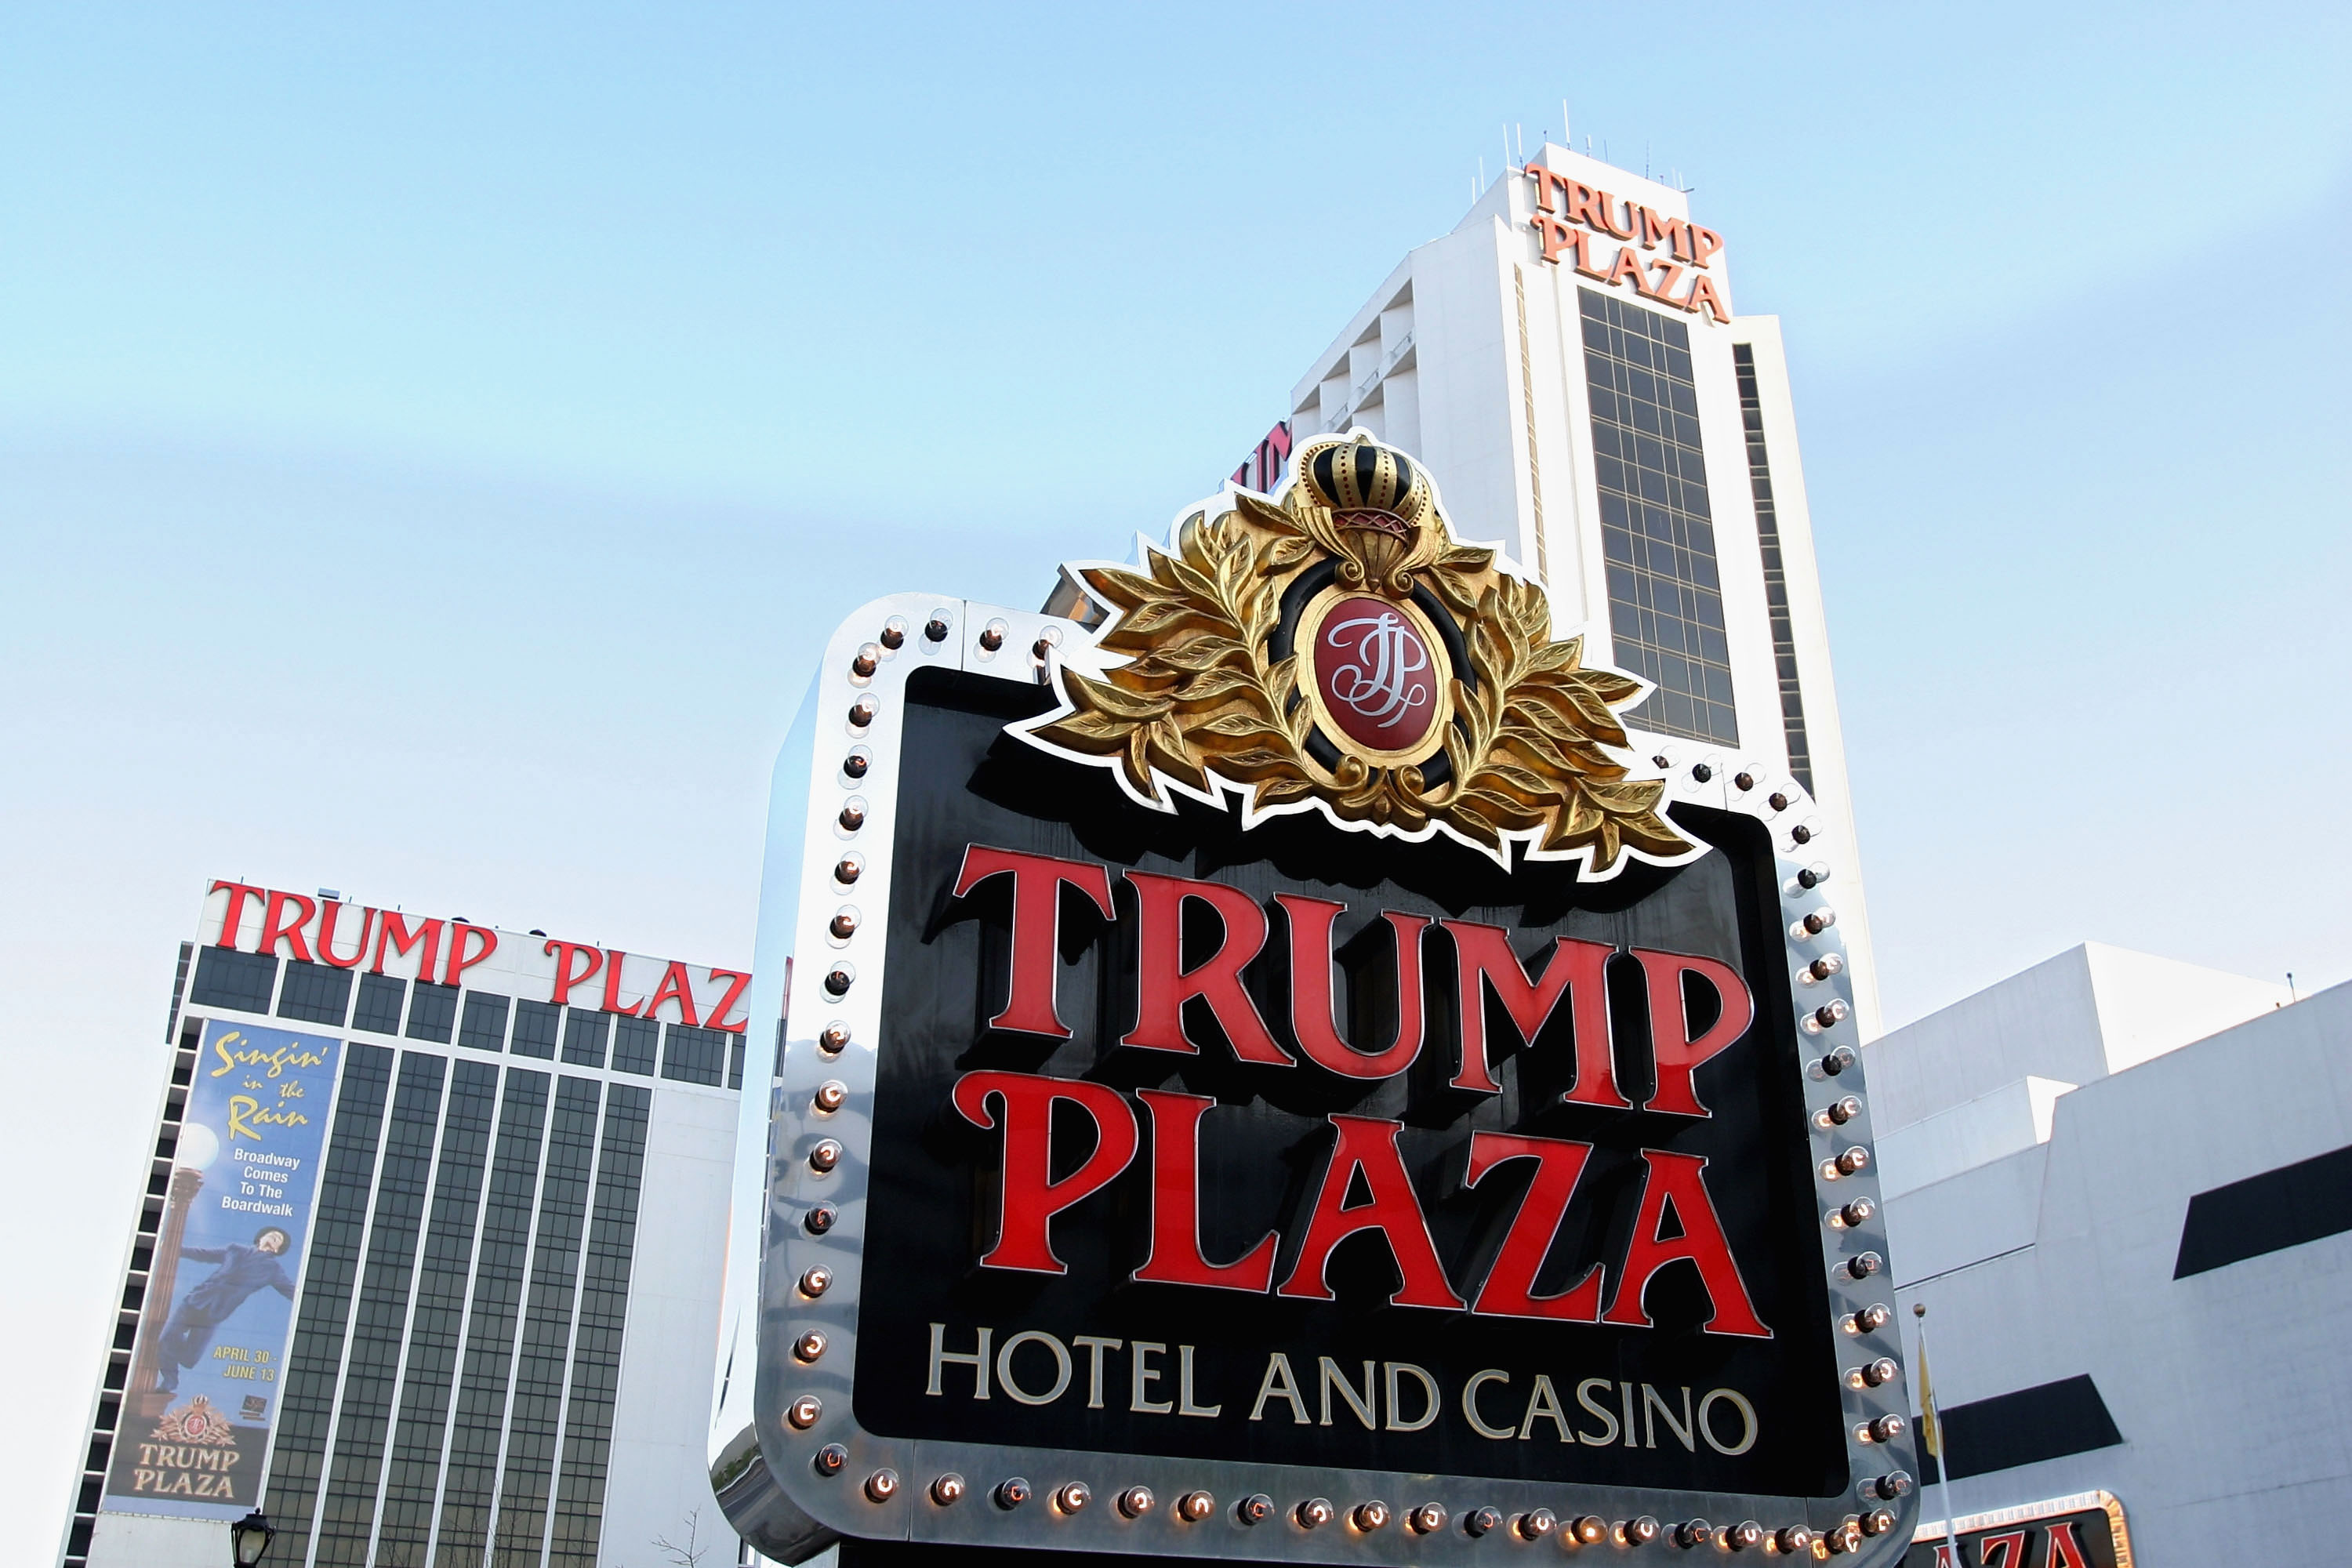 The Trump Plaza Hotel and Casino in Atlantic City, May 8, 2004. (Craig Allen—Getty Images)